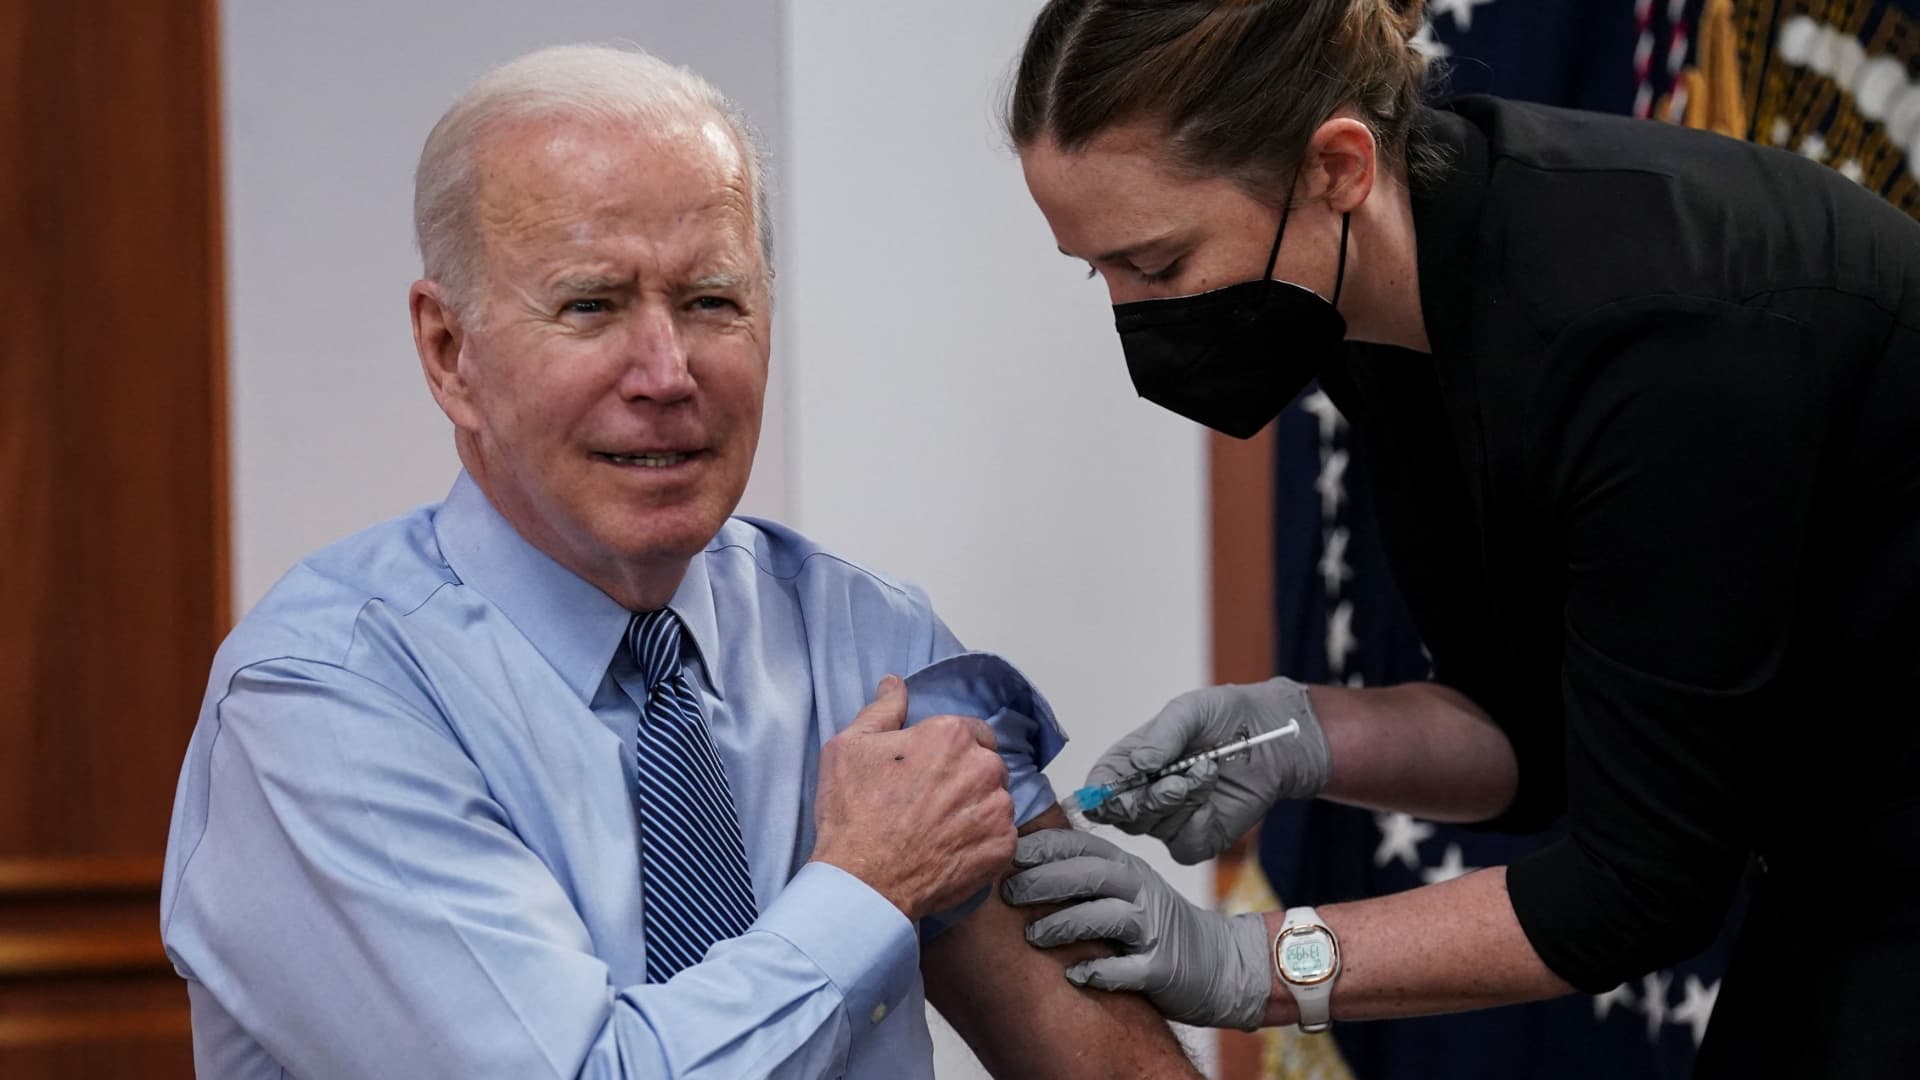 U.S. President Joe Biden receives a second coranavirus disease (COVID-19) booster vaccination after delivering remarks on COVID-19 in the Eisenhower Executive Office Building’s South Court Auditorium at the White House in Washington, U.S., March 30, 2022. 